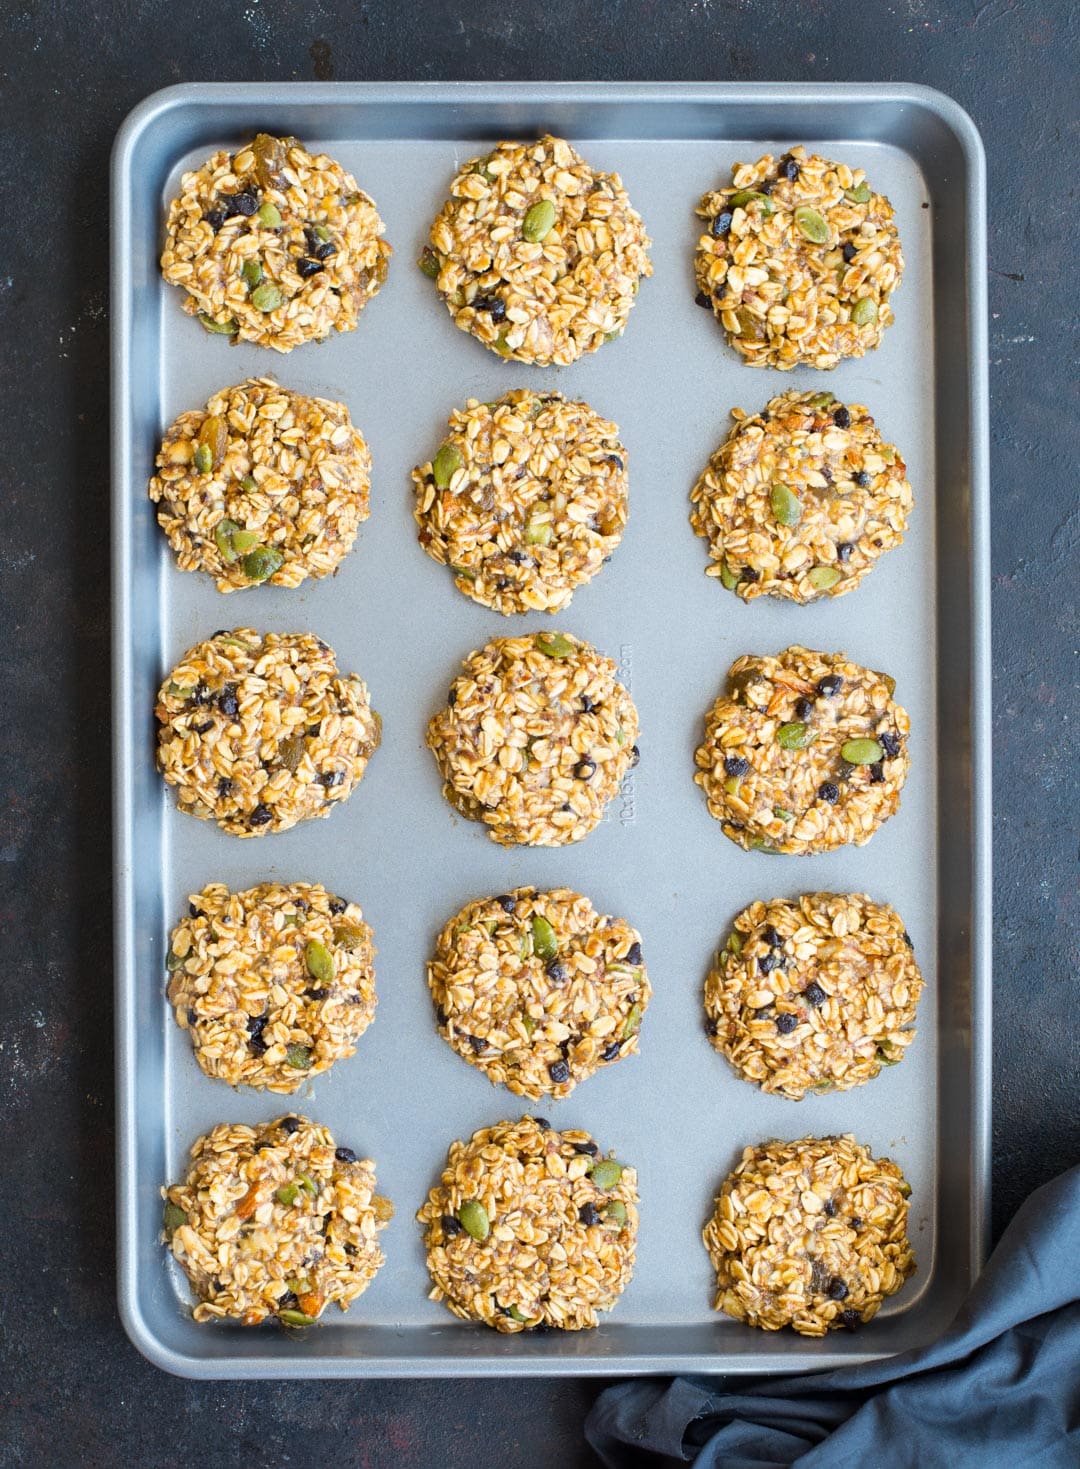 These Healthy Breakfast Cookies made with Banana, Oatmeal, nuts, seeds are gluten-free and Vegan. These make-ahead breakfast cookies are perfect for busy mornings.